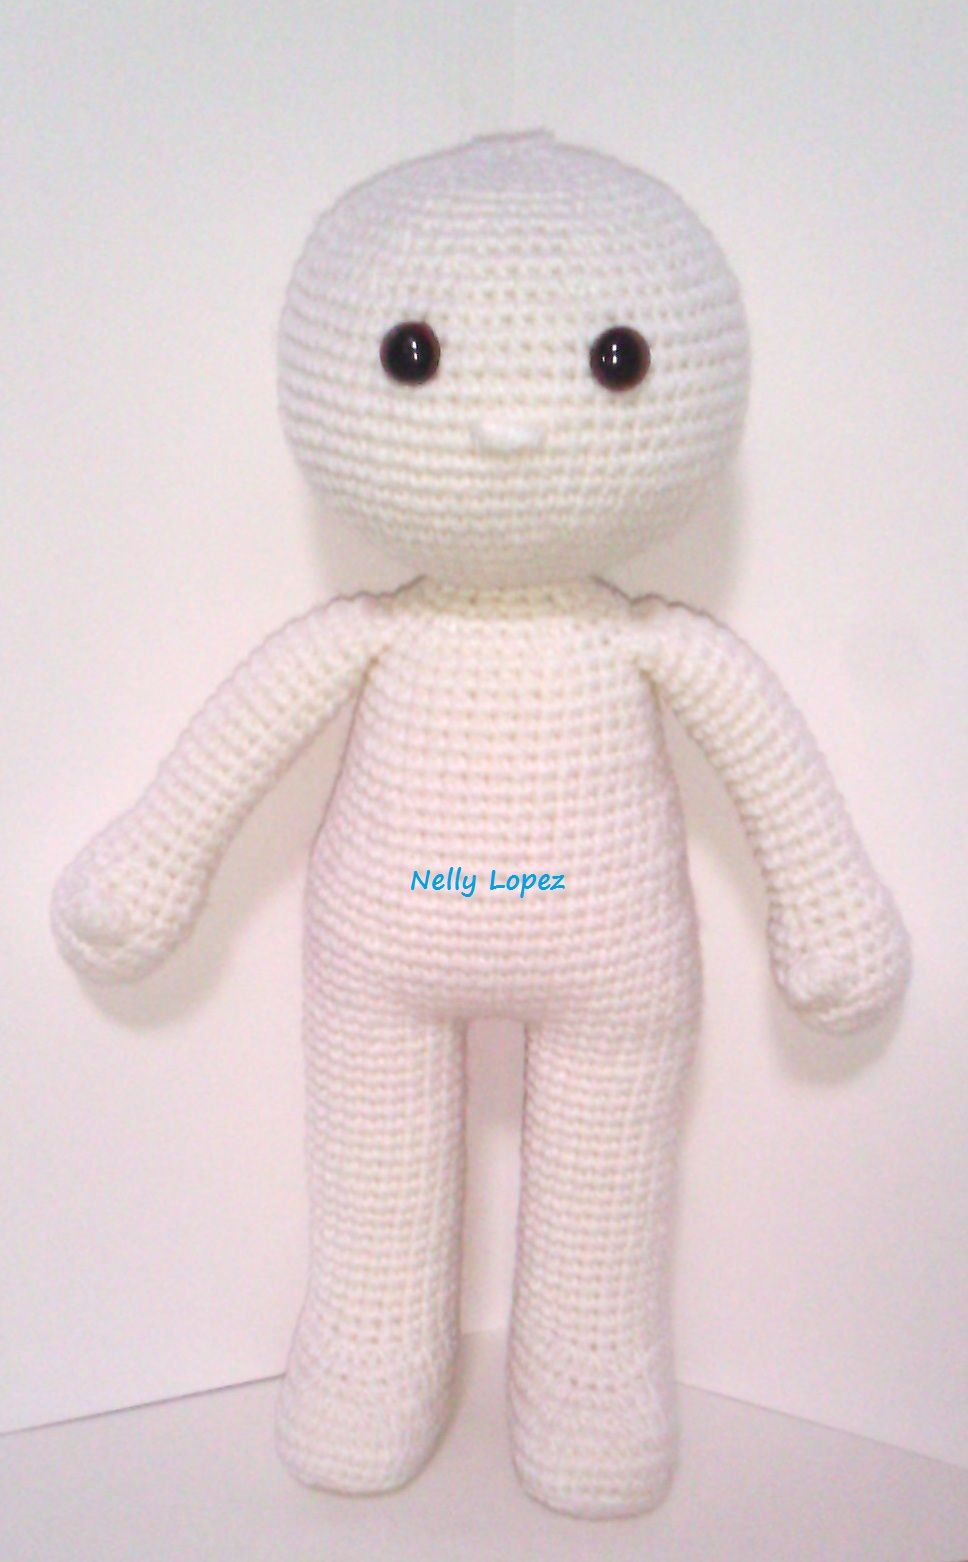 Simple Crochet Doll Pattern A Blog About Patterns For Making Crocheted Doll Doll Clothing And